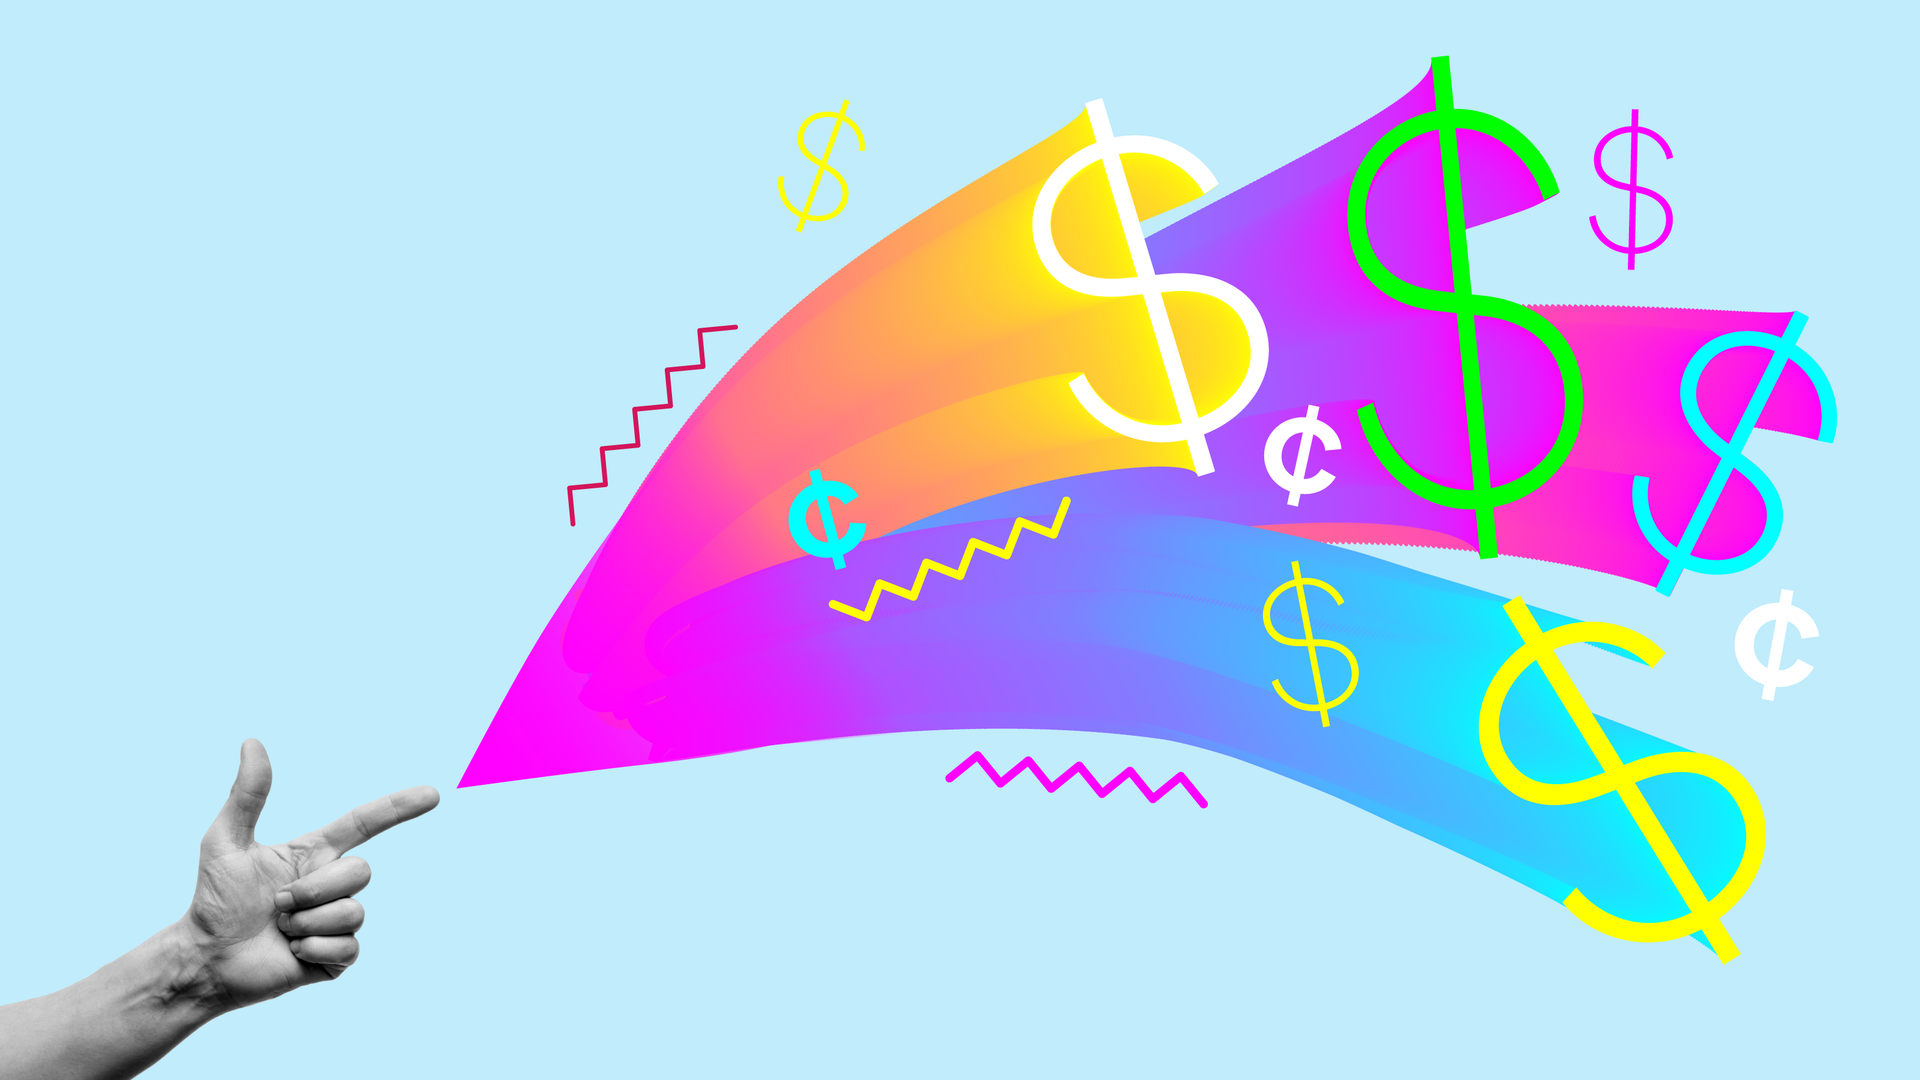 Illustration of money signs shooting from a hand to illustrate company funding.